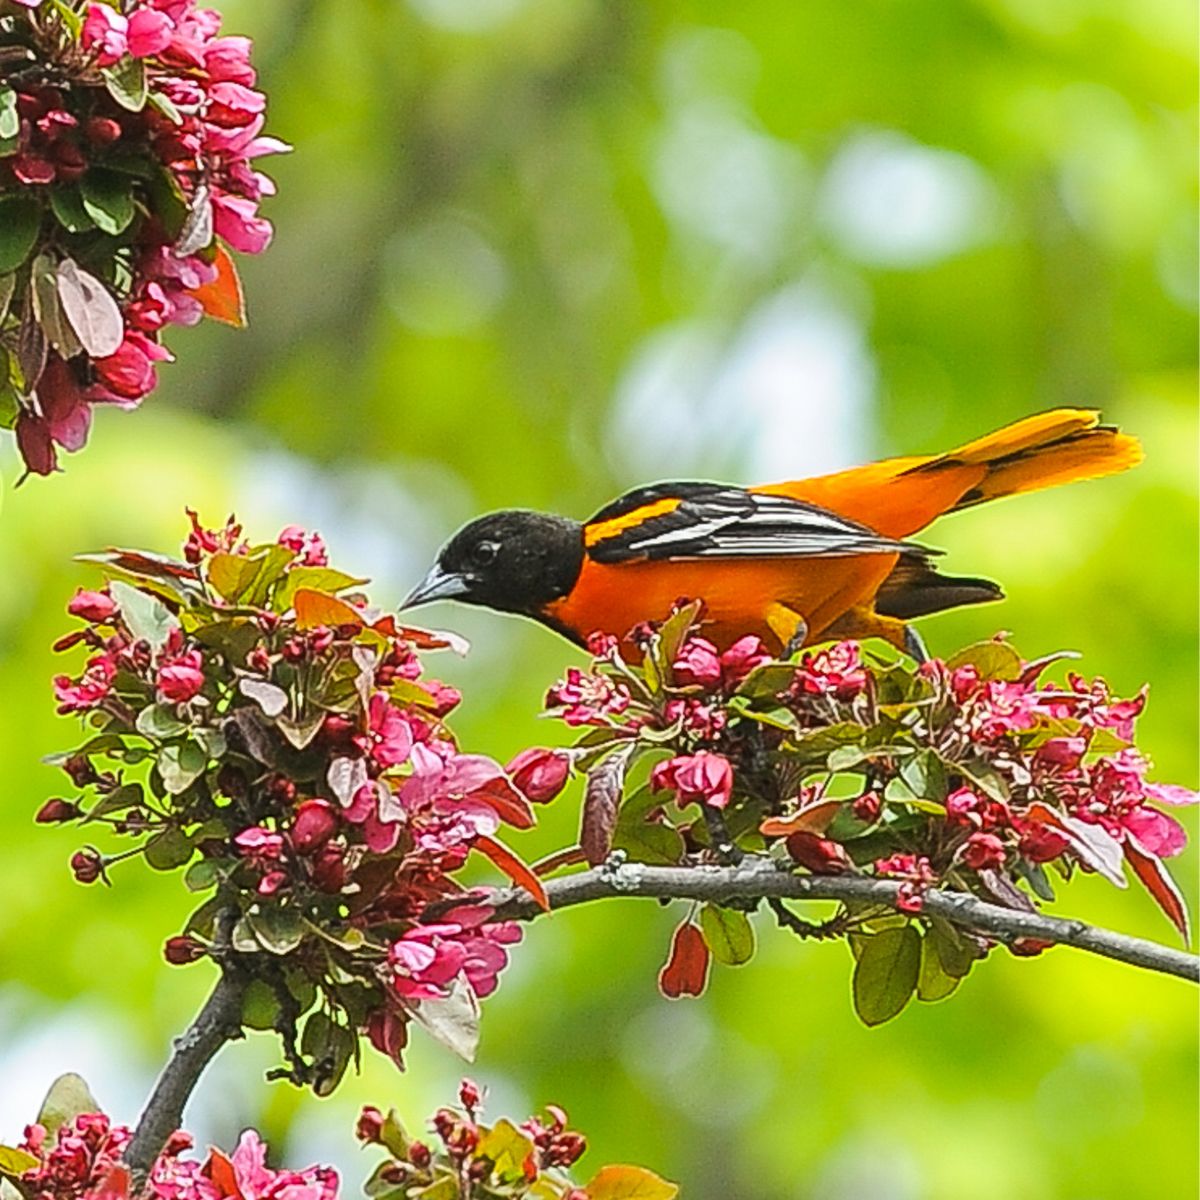 a male Baltimore oriole perched on a blooming apple tree branch.